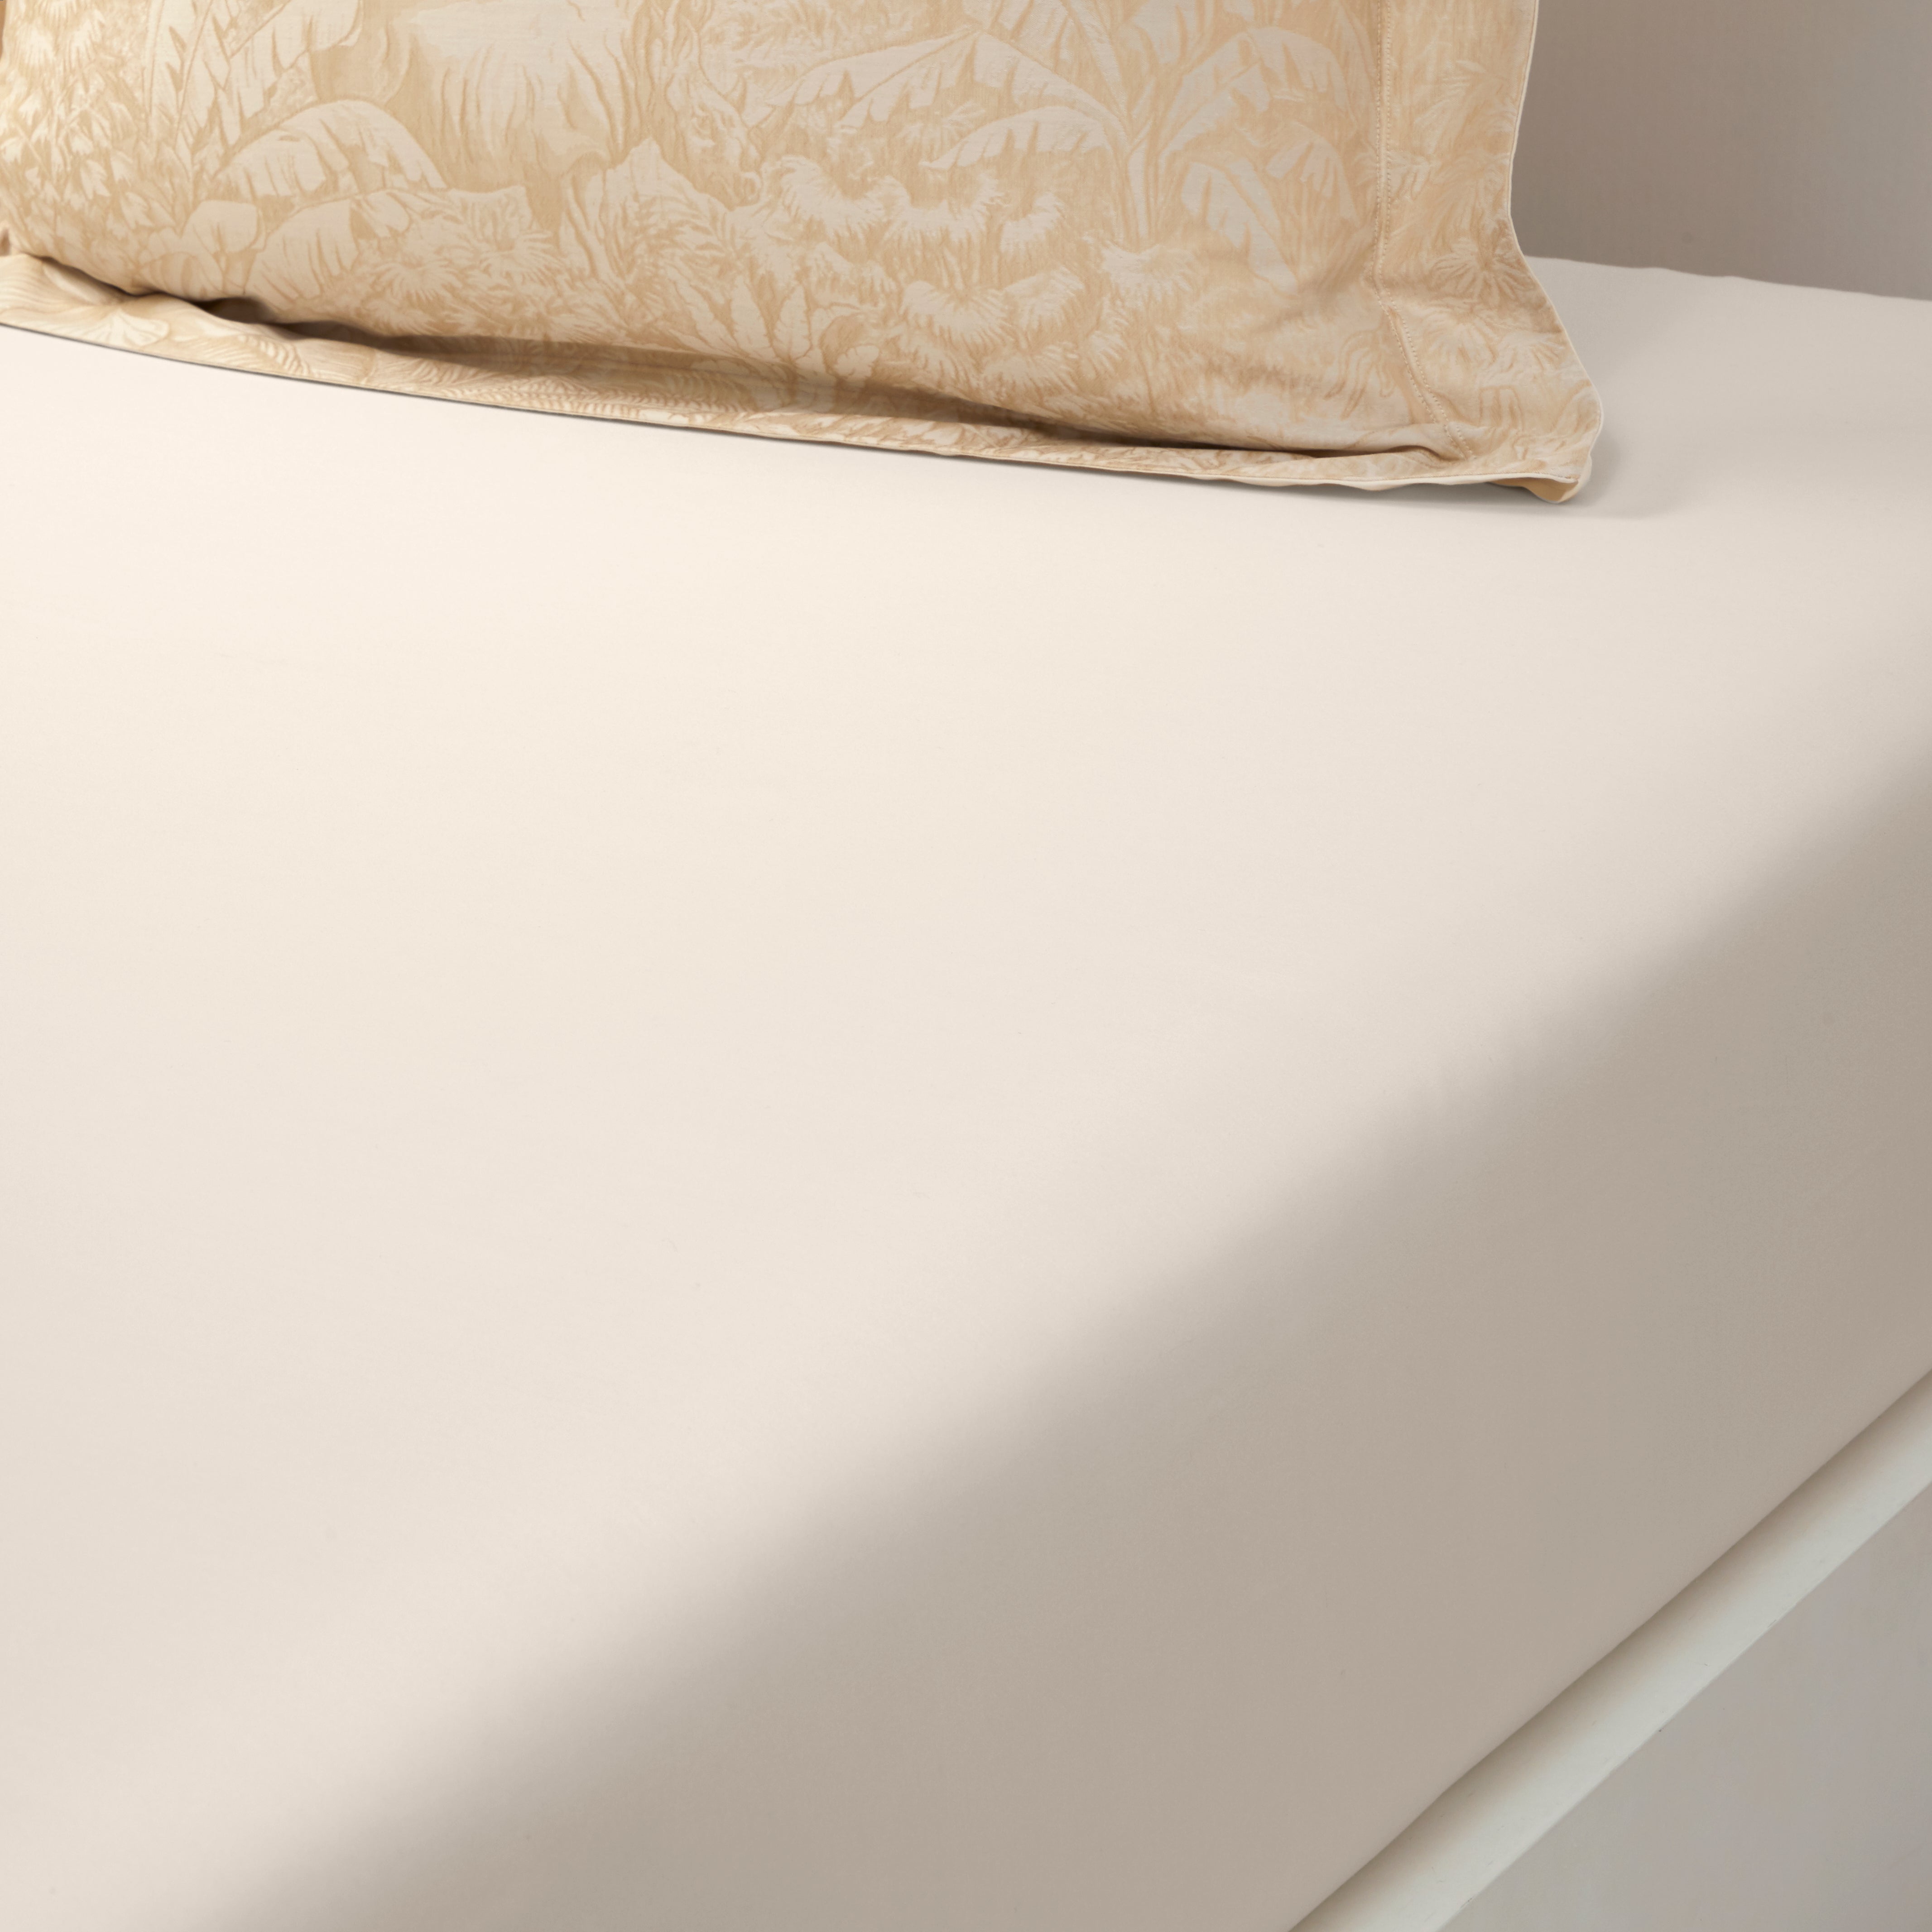 Faune Organic Bed Linens